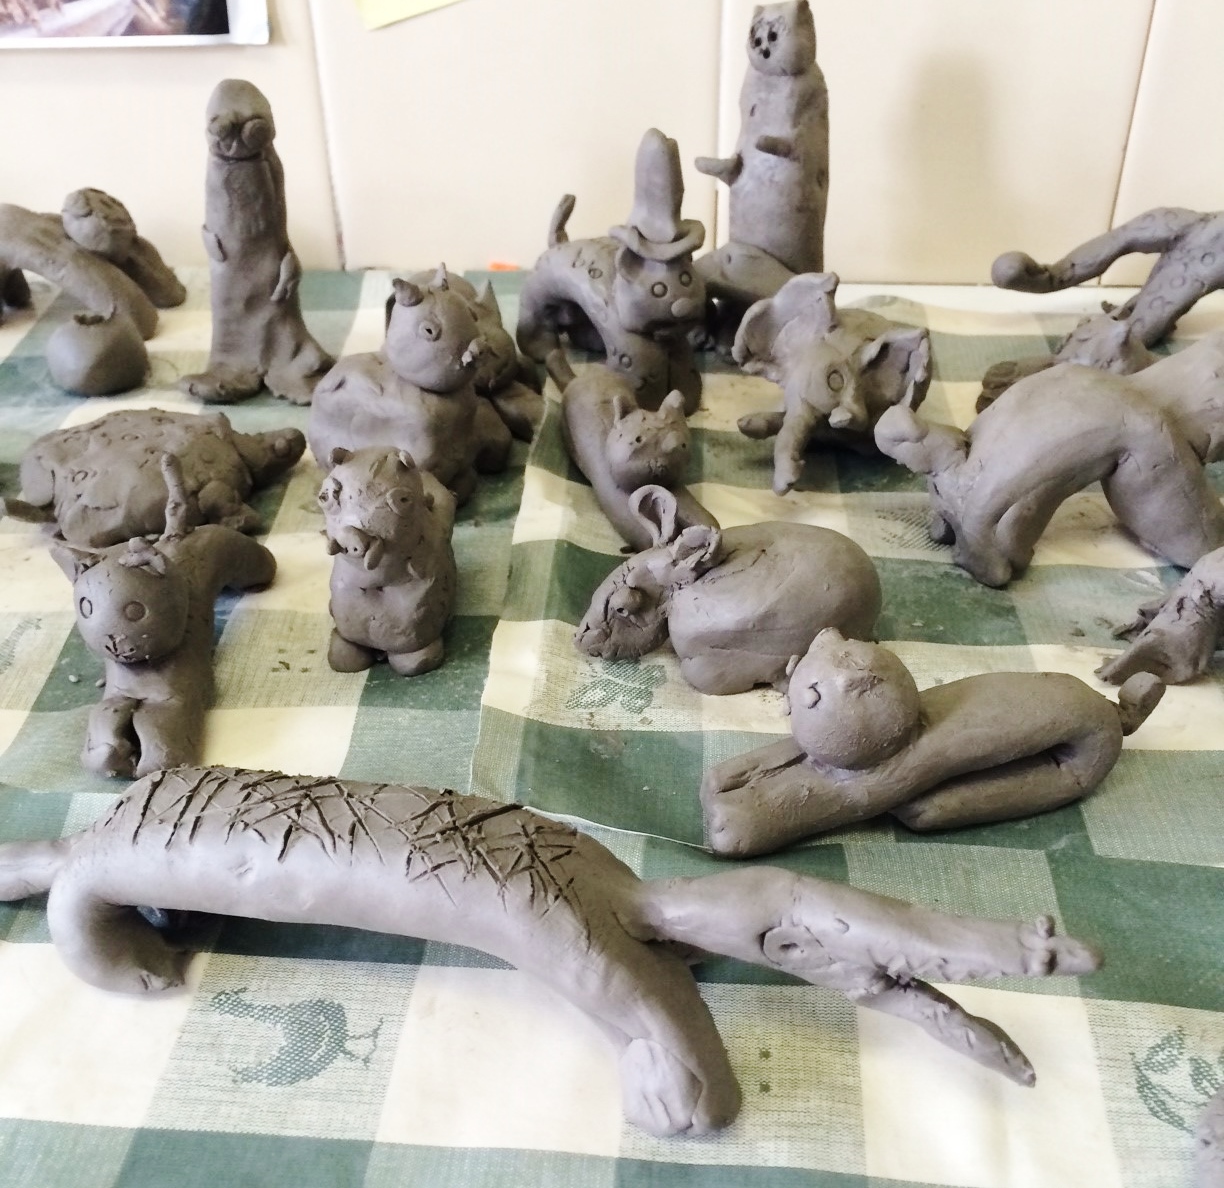 Primary School Lessons: Creating Animals in Clay